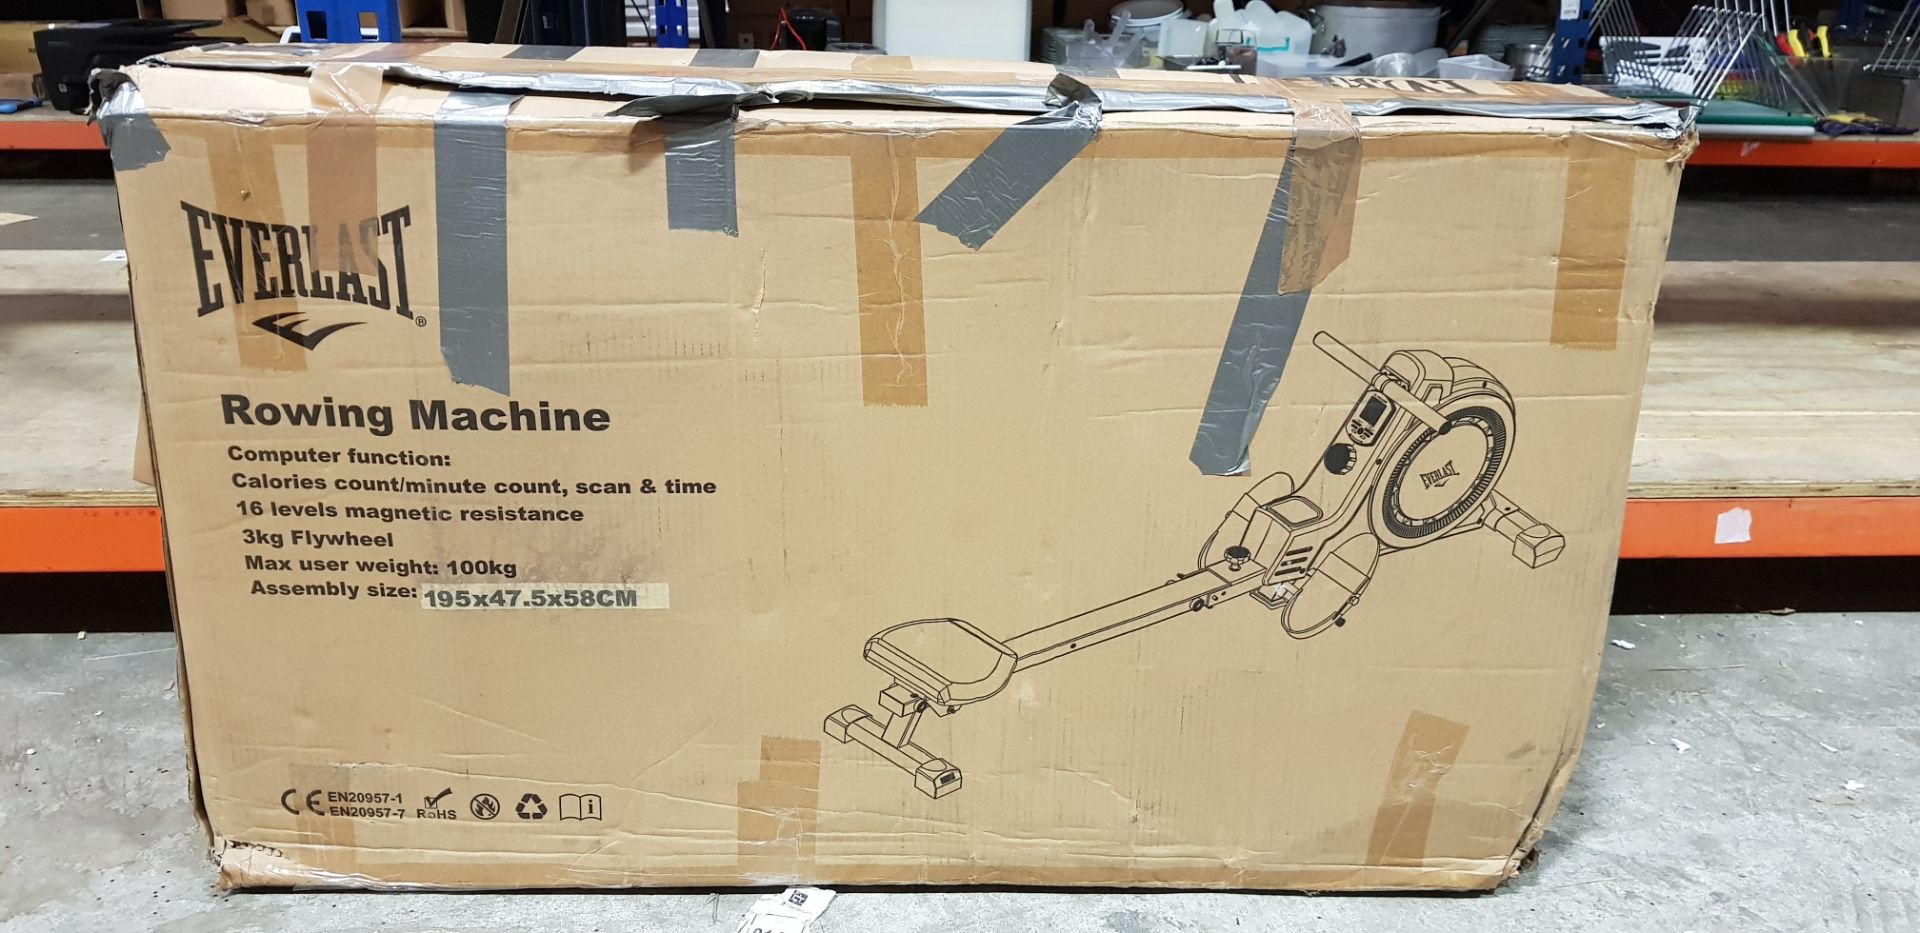 1 X EVERLAST FOLDABLE ROWING MACHINE IN SILVER - PLEASE NOTE THIS IS CUSTOMER RETURNS